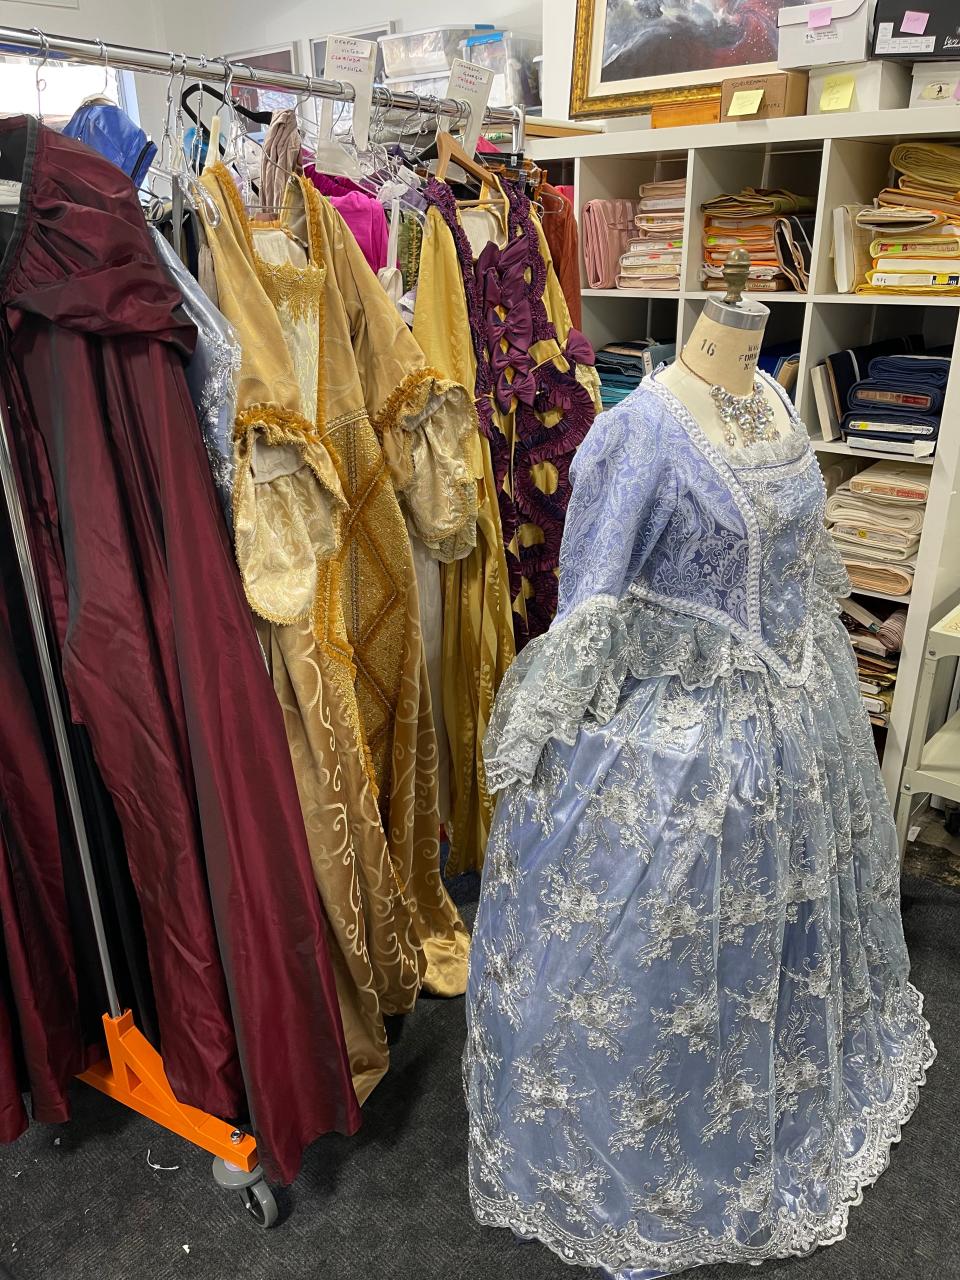 Costumes for Kentucky Opera's production of "Cinderella"